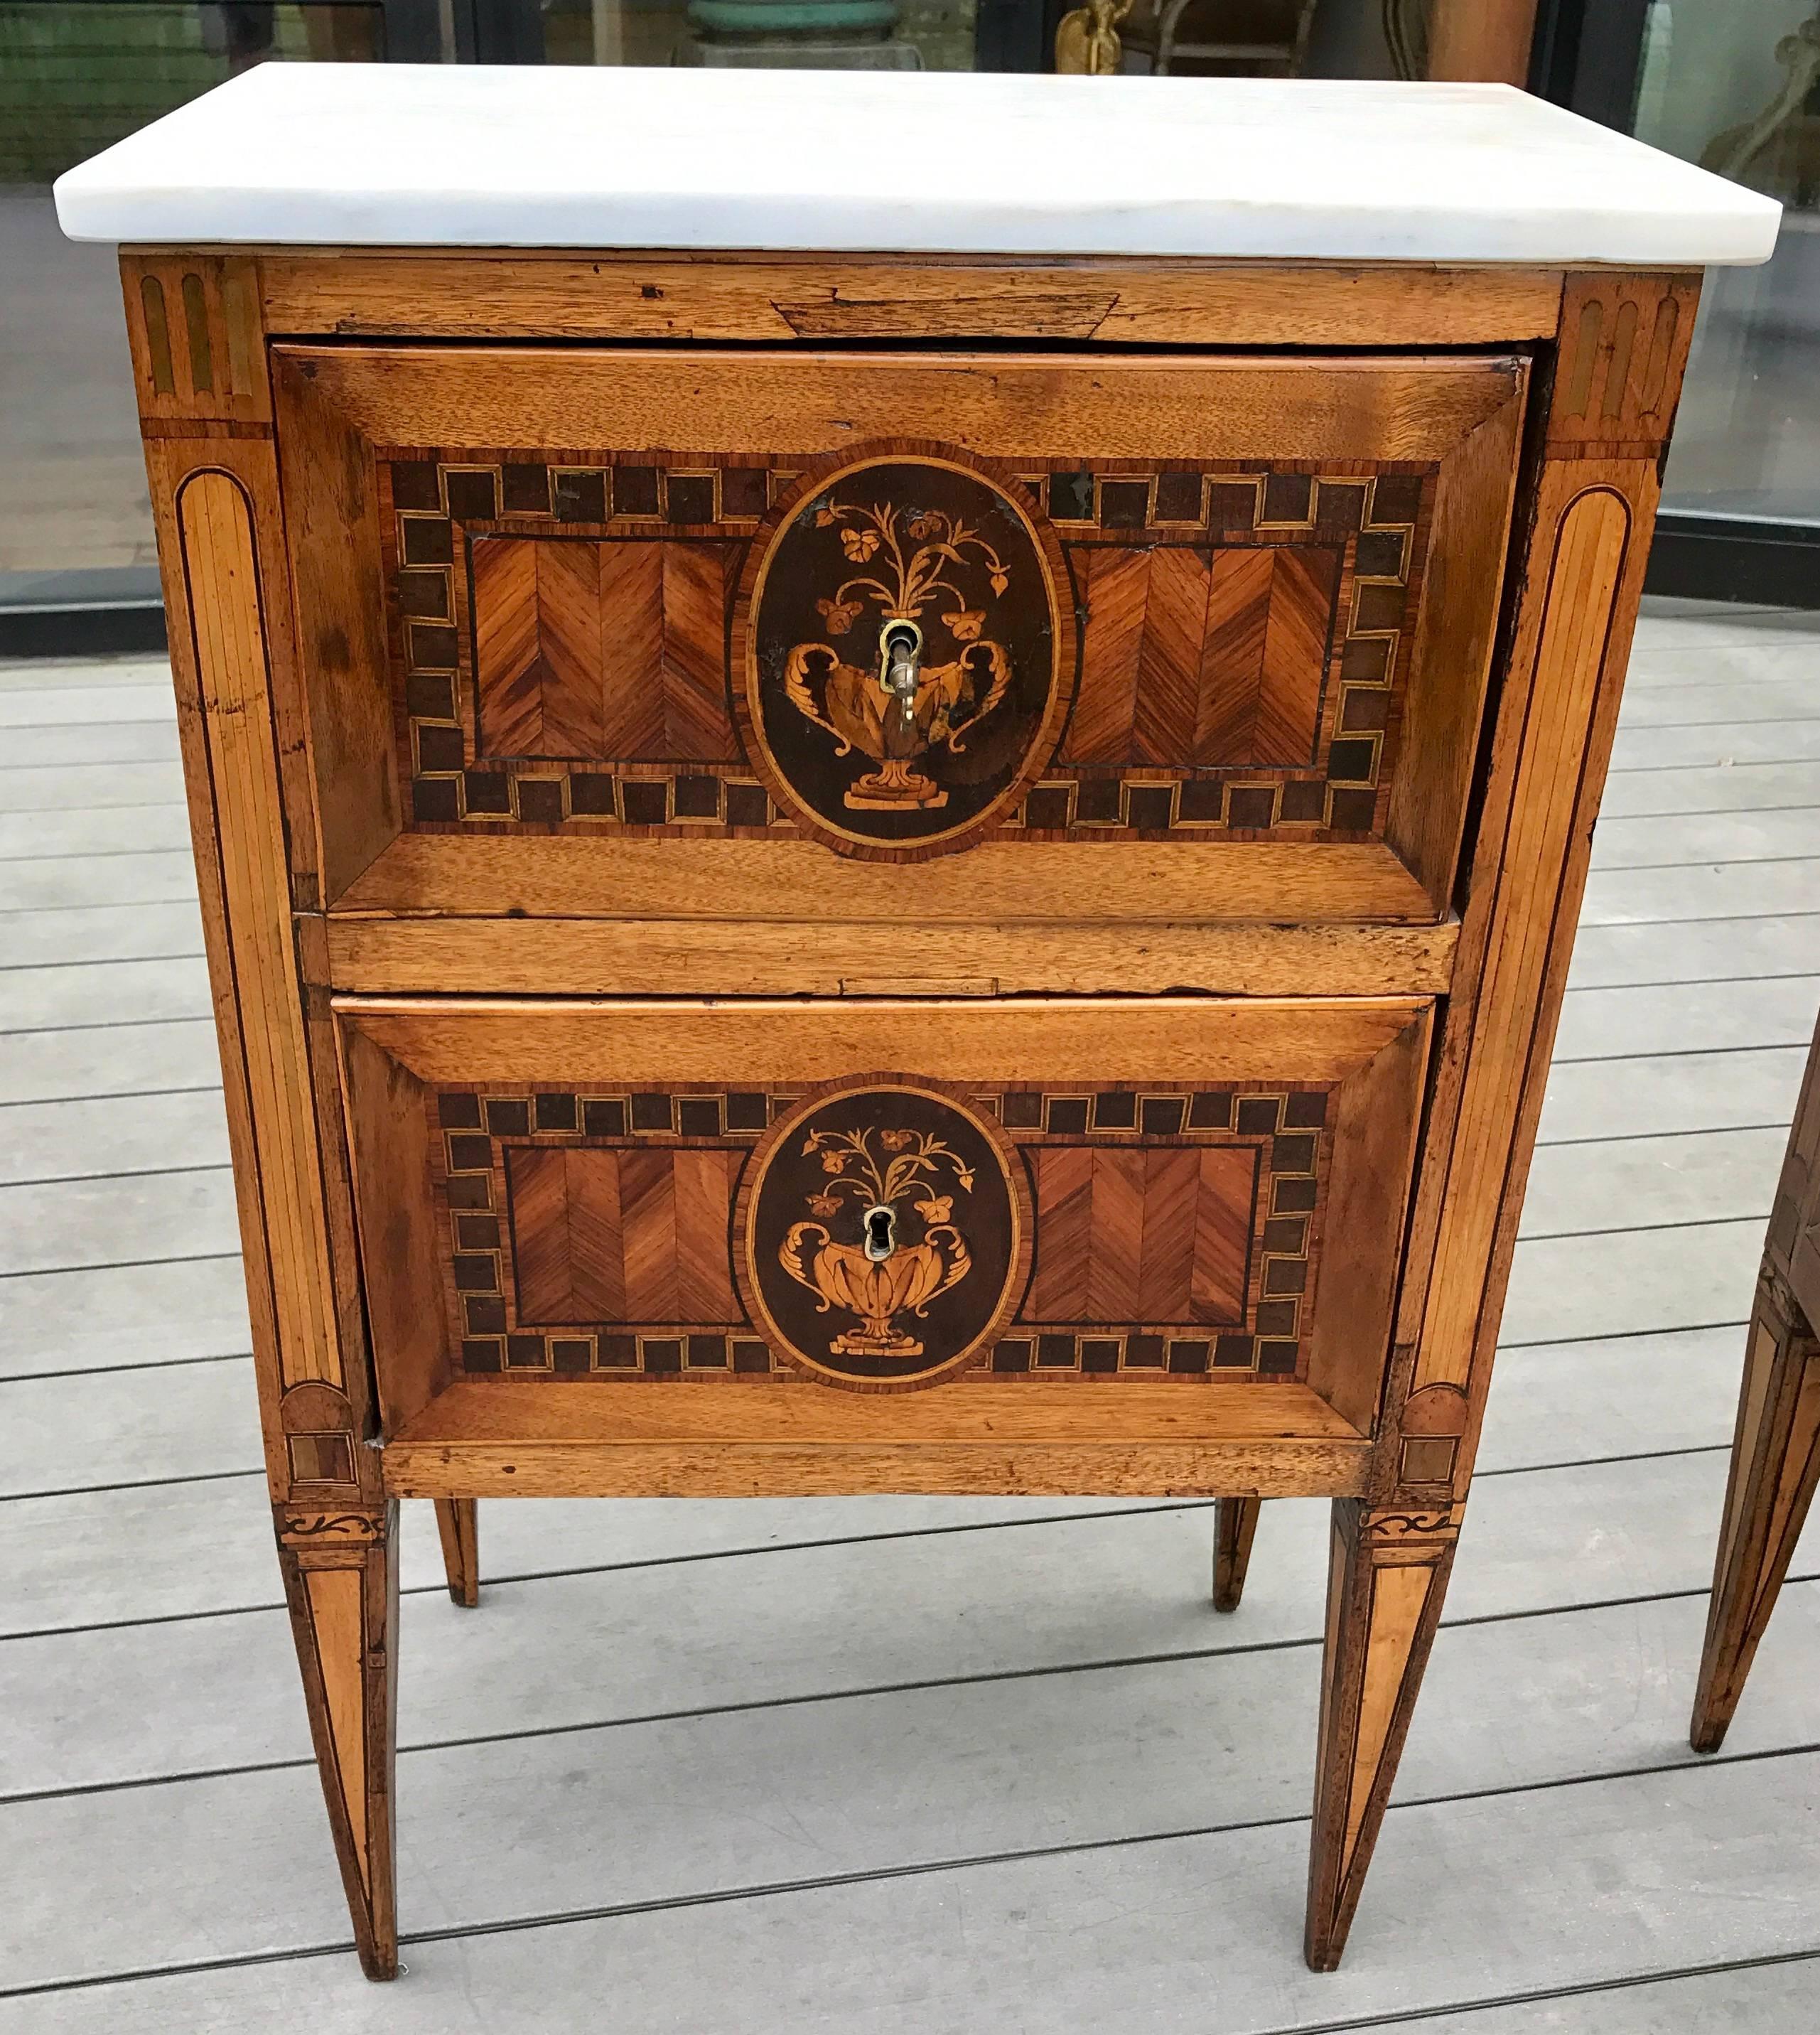 Period 18th Century Italian Neoclassical Commodes

--Urn and Flower inlay
--Walnut, Applewood, Pearwood
--Original Legs and Secondary Wood

